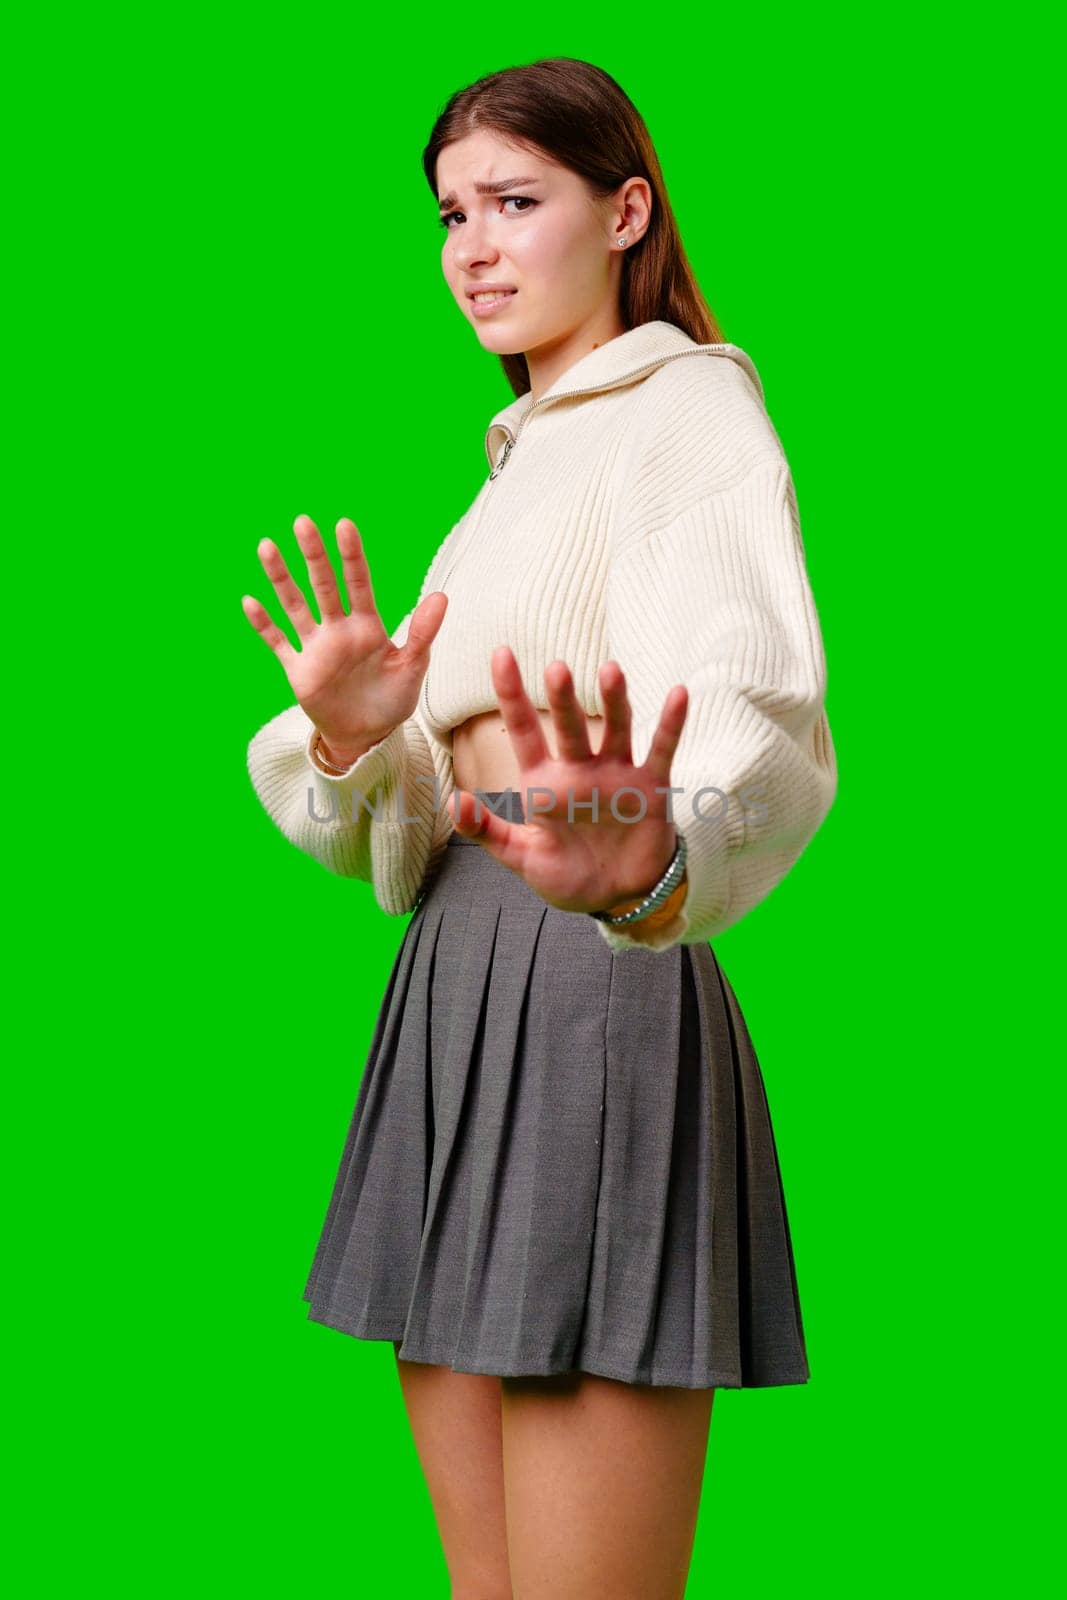 A young woman stands with her body turned slightly, looking towards the camera with a serious expression. She holds up both her hands in a stop gesture, indicating a refusal or a boundary being set. The green backdrop suggests this could be used for digital editing purposes.